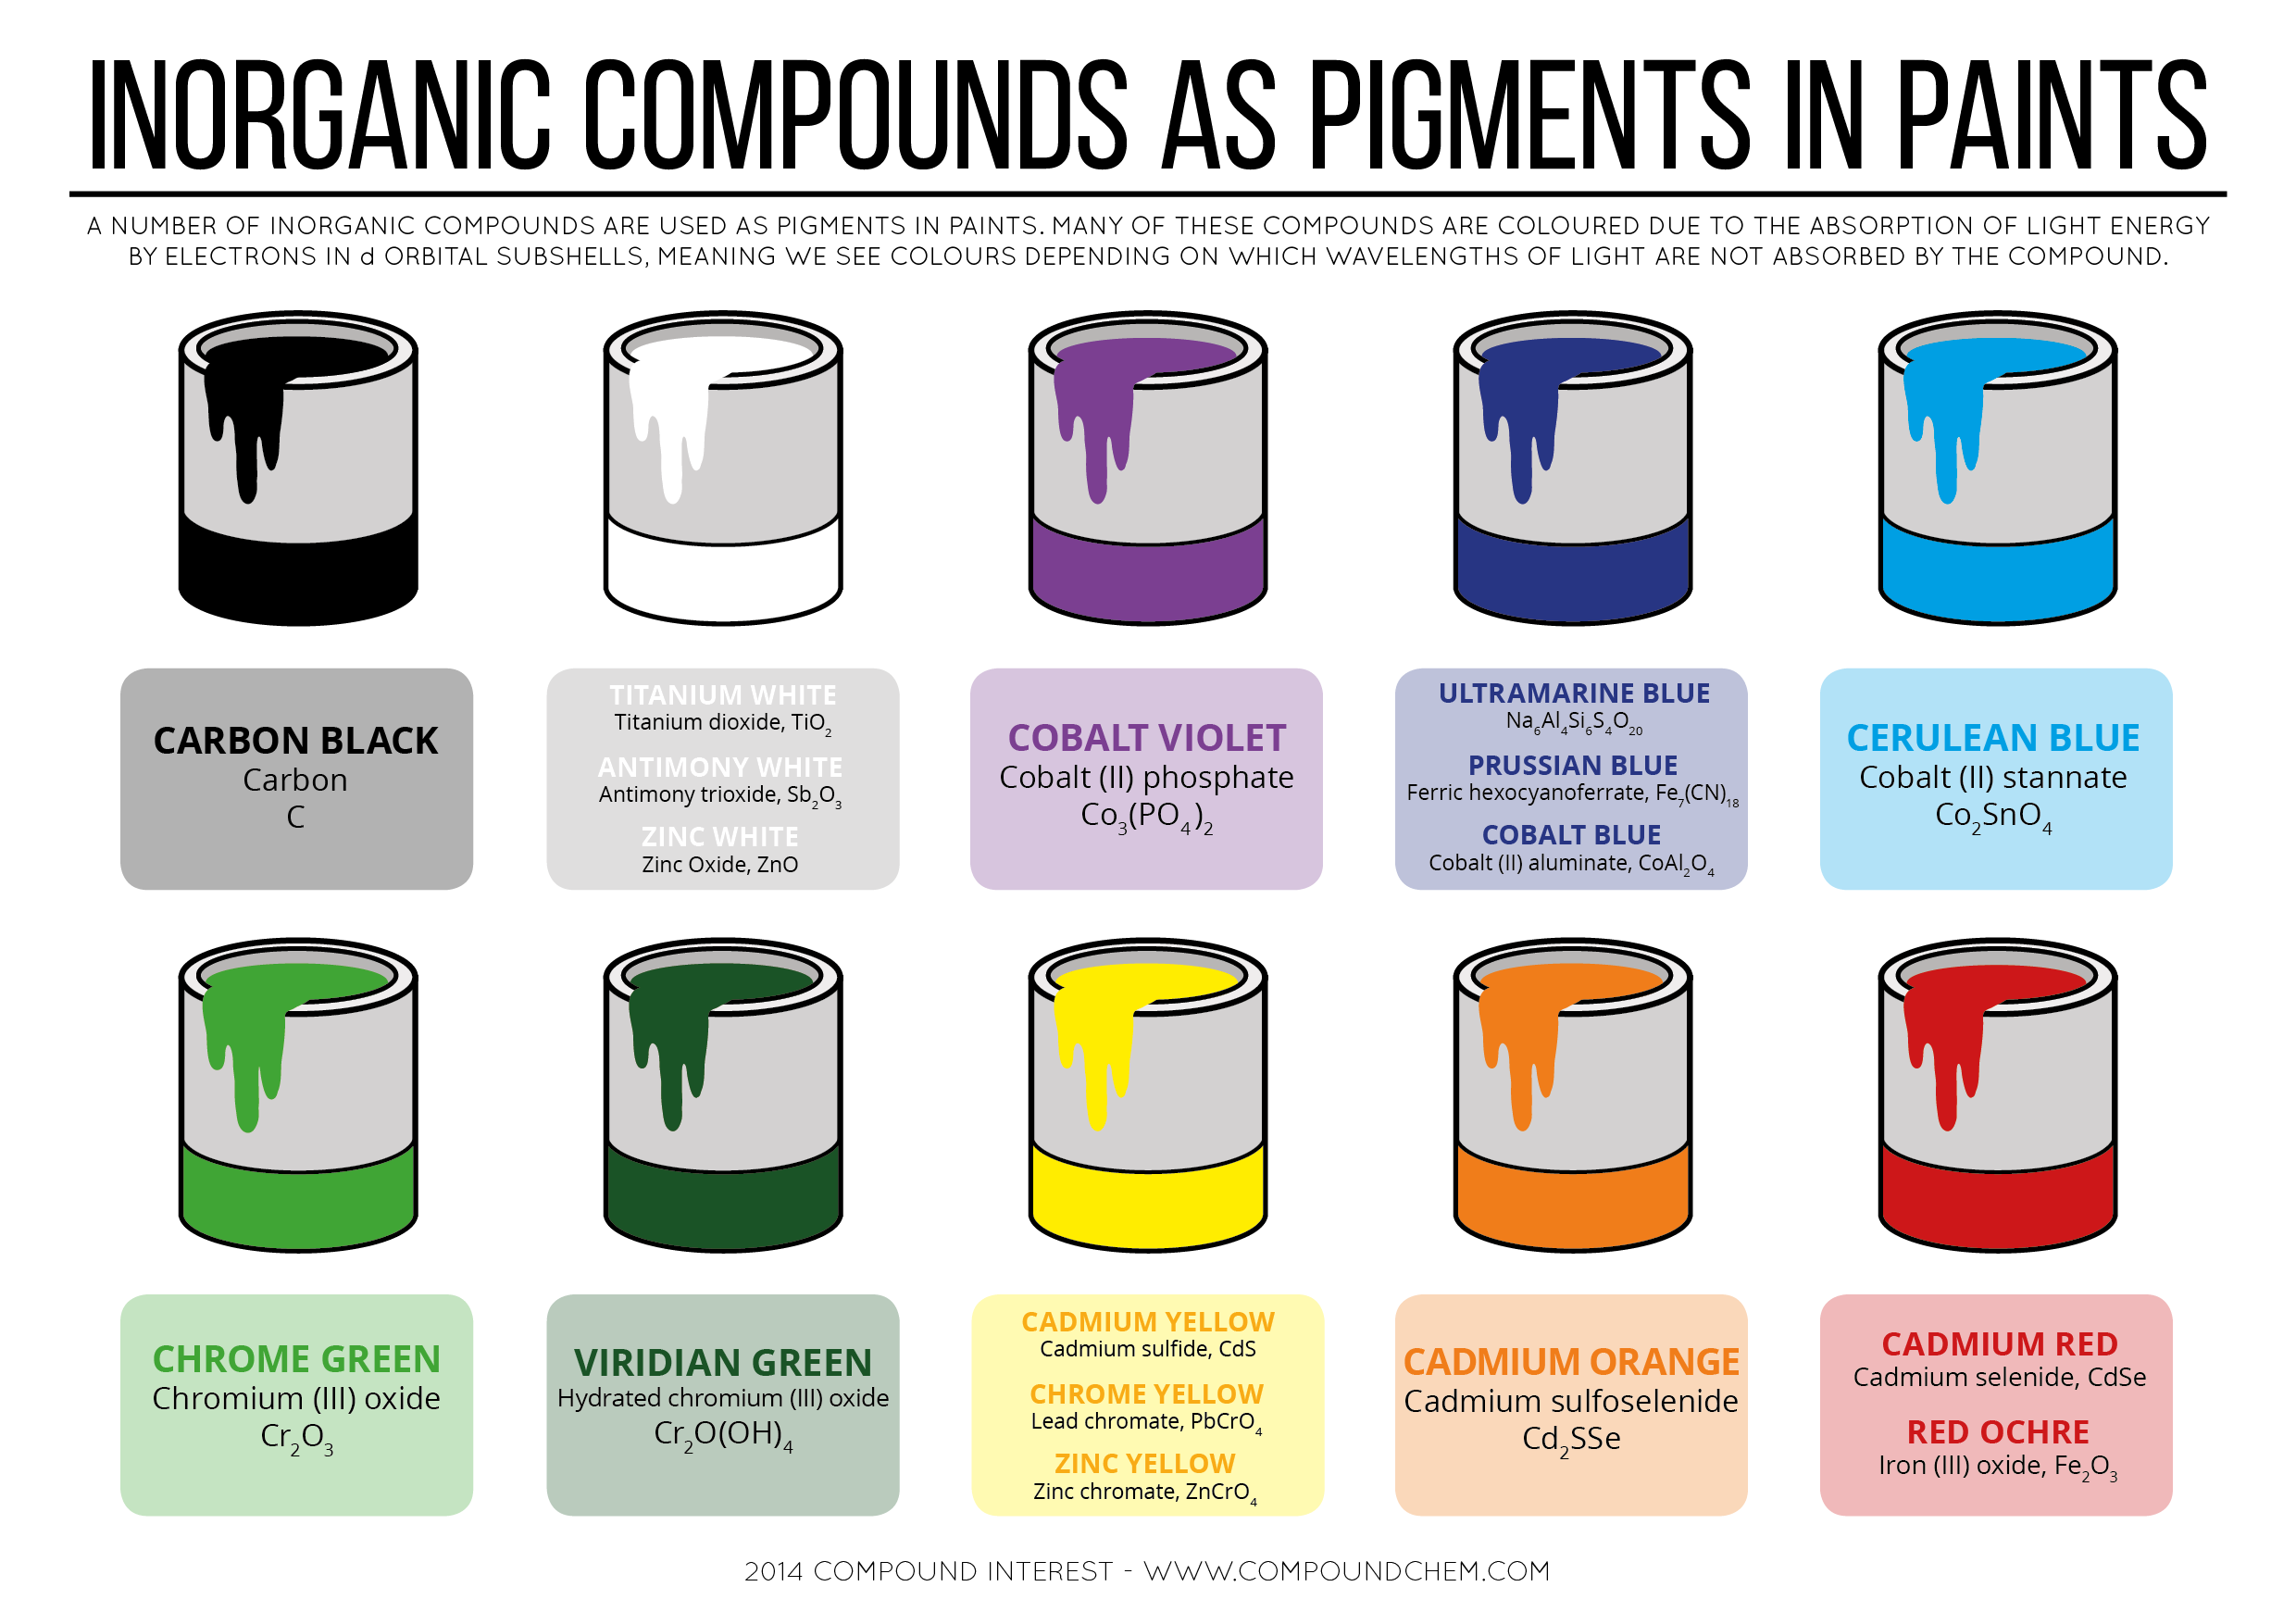 Inorganic Compounds As Pigments in Paints